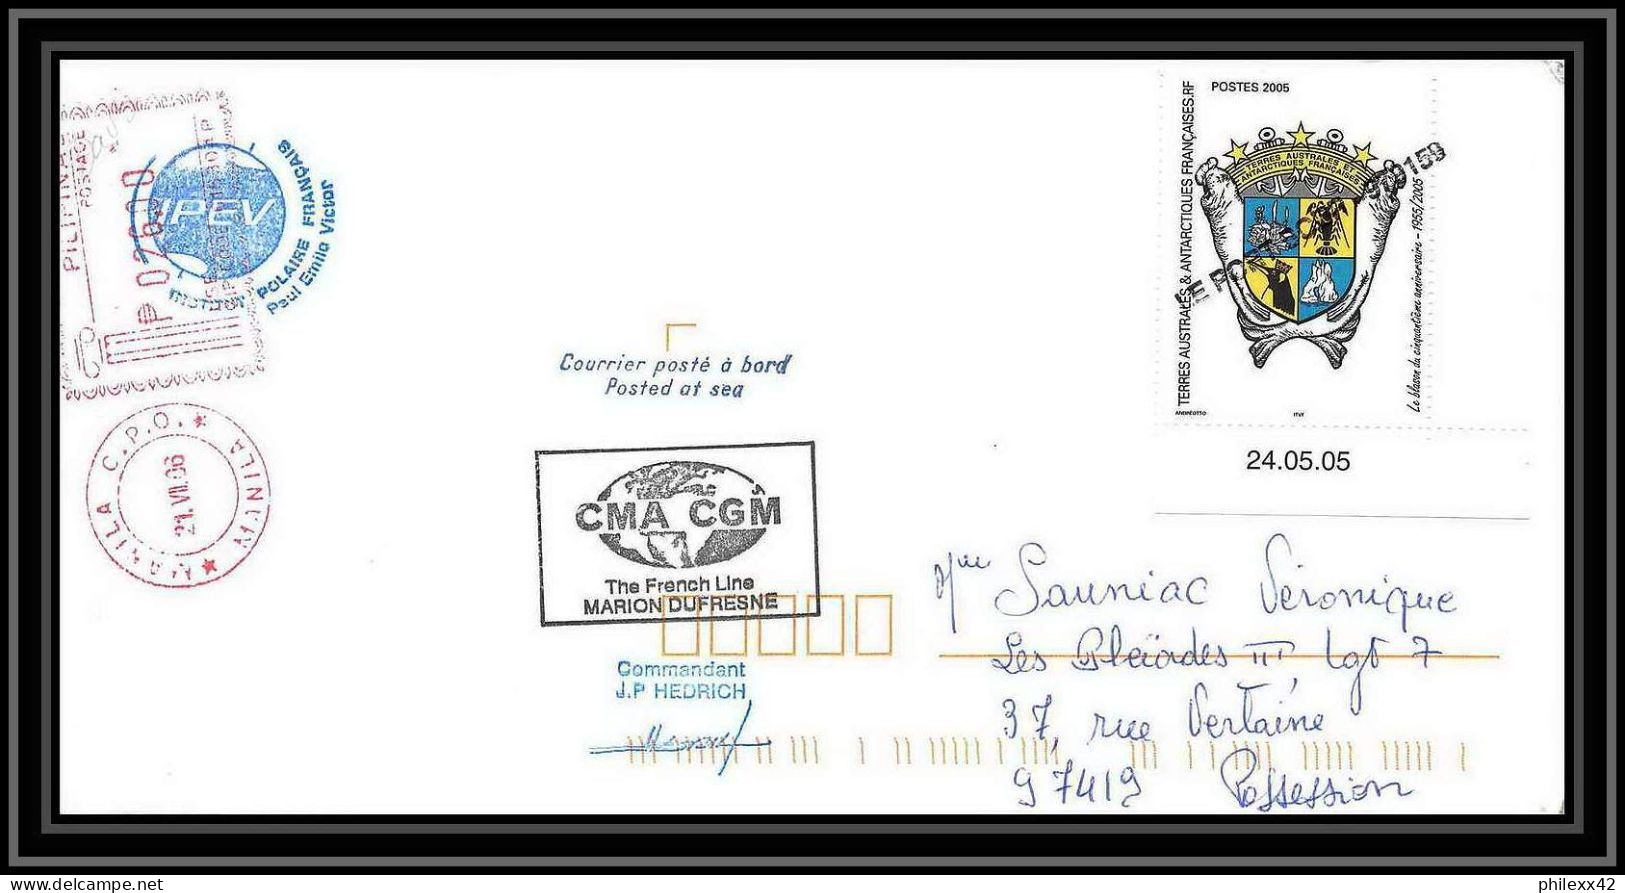 2590 ANTARCTIC Taaf Philippines Pilipinas Mixte Lettre Cover Dufresne 2 Signé Signed Md 155 Marco Polo 2 2006 - Antarktis-Expeditionen